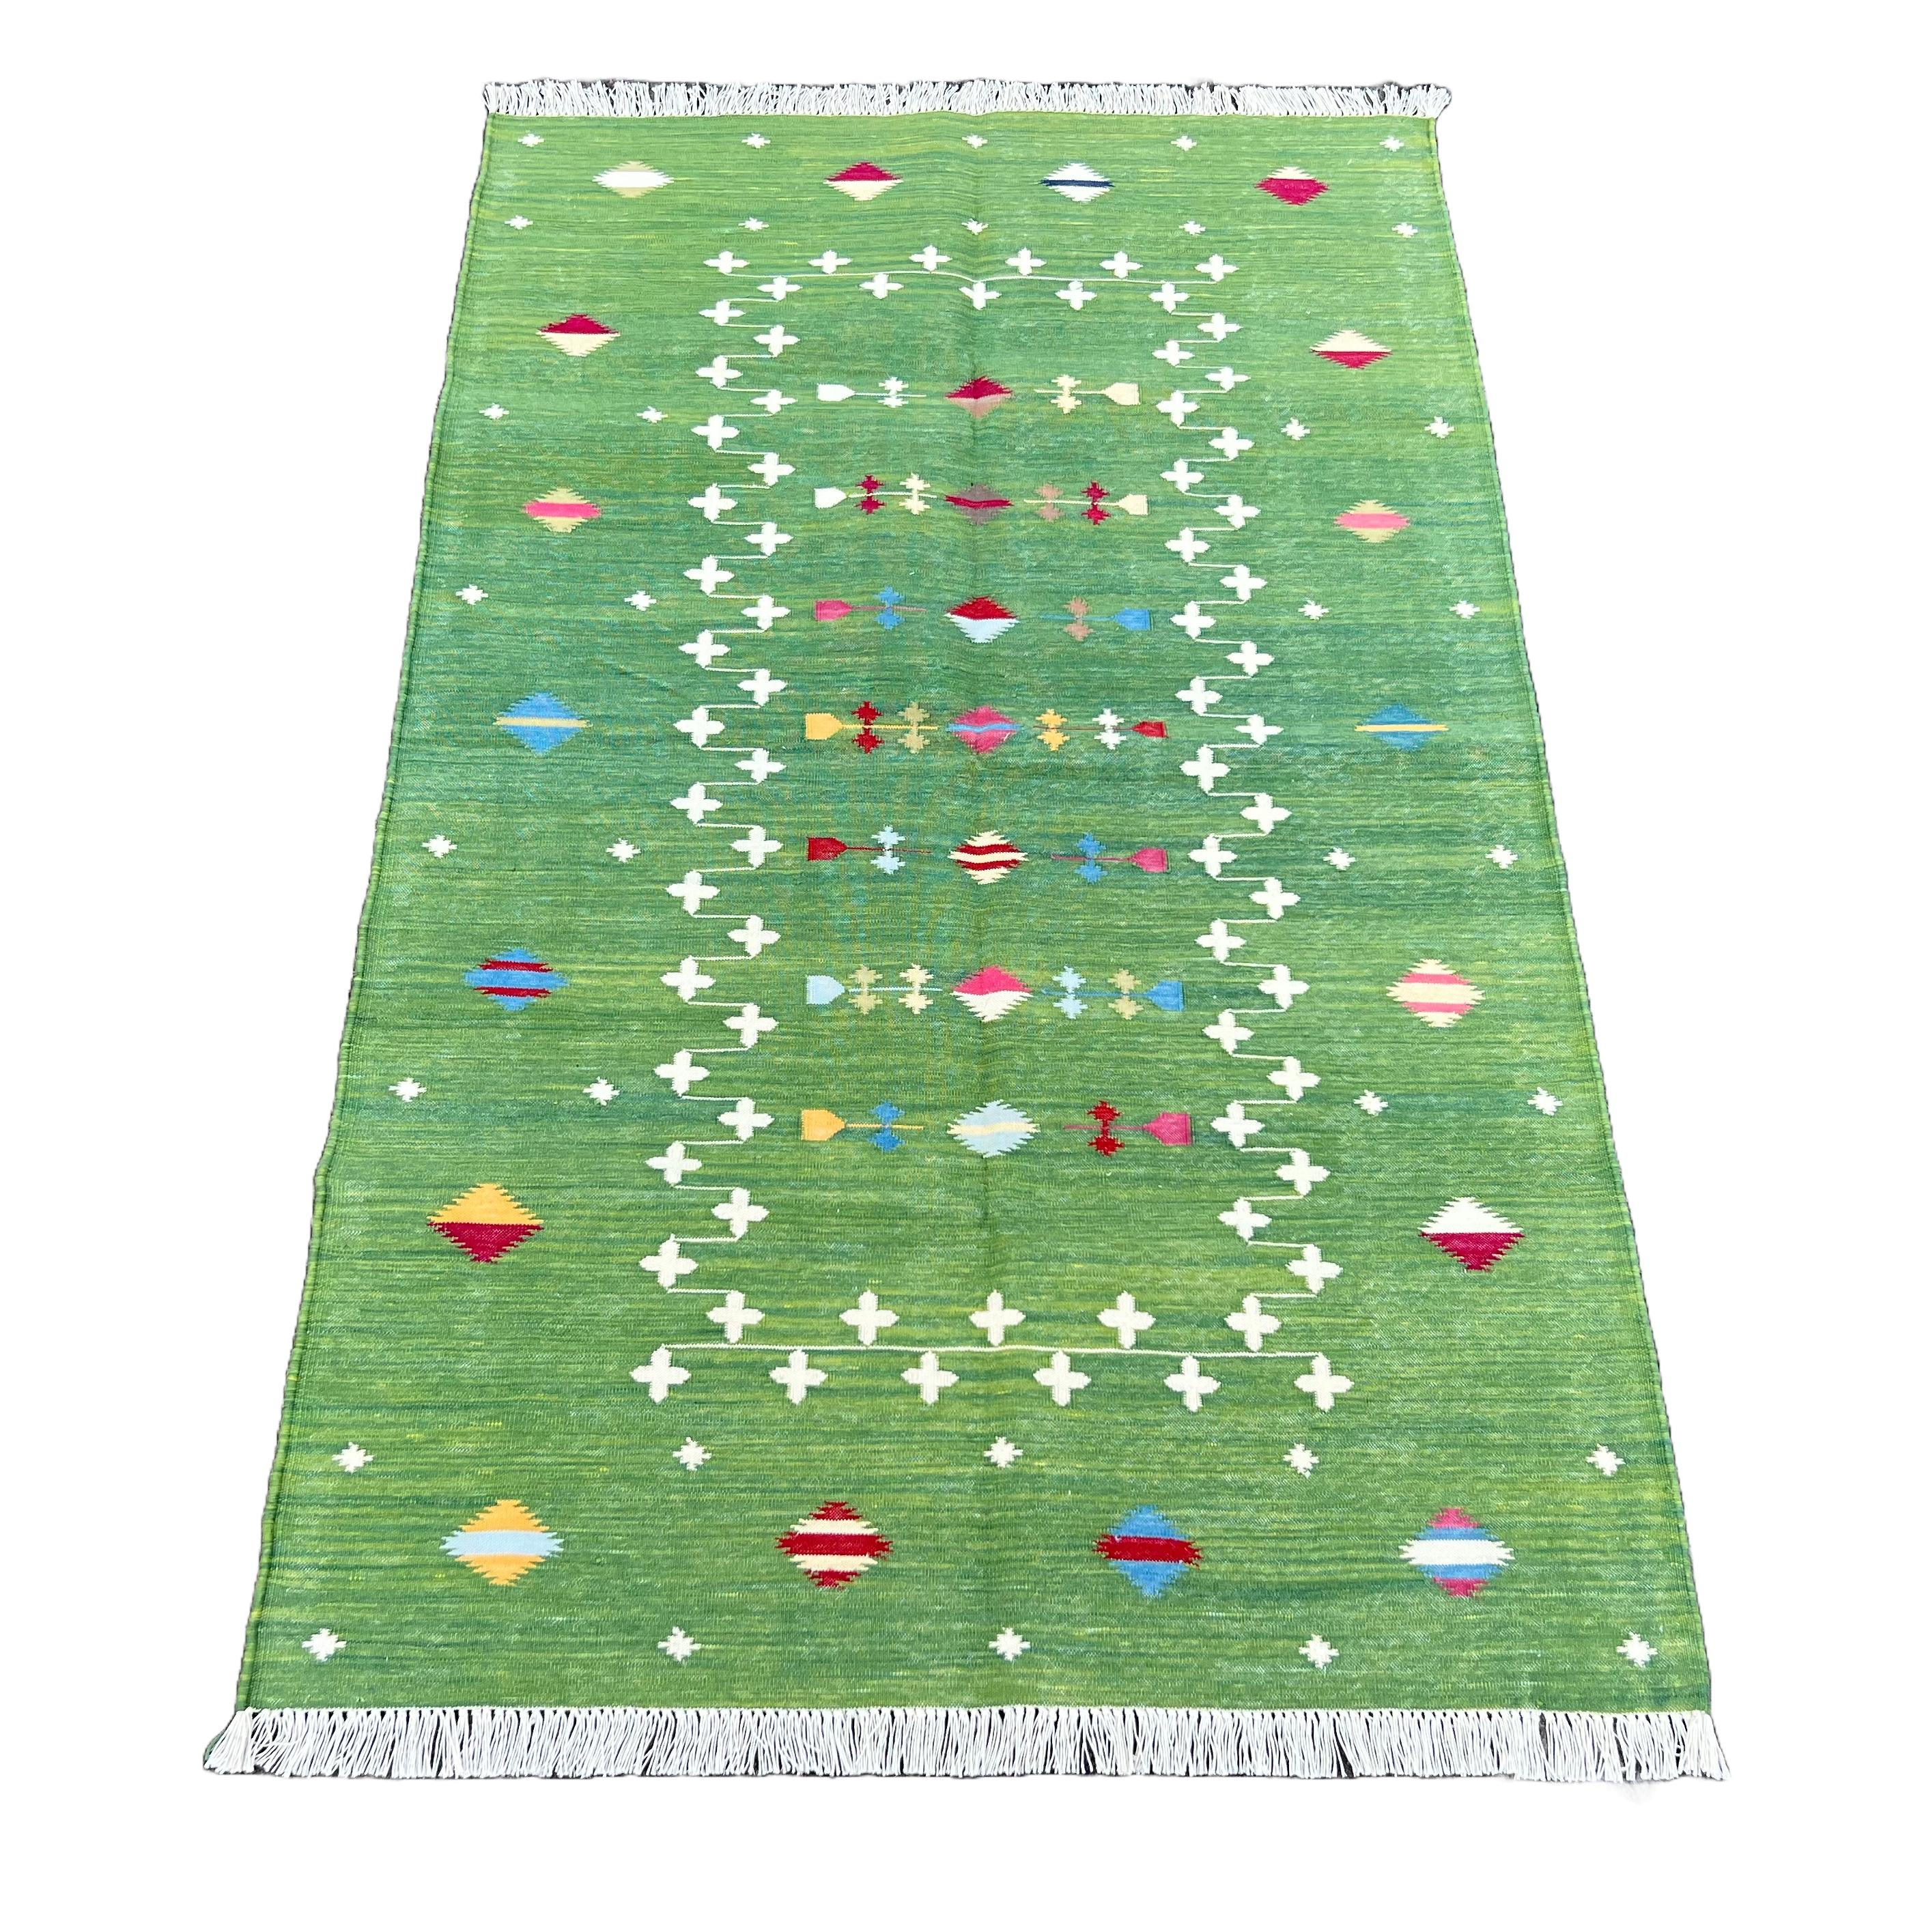 Contemporary Handmade Cotton Area Flat Weave Rug, 3x5 Green Shooting Star Indian Dhurrie Rug For Sale